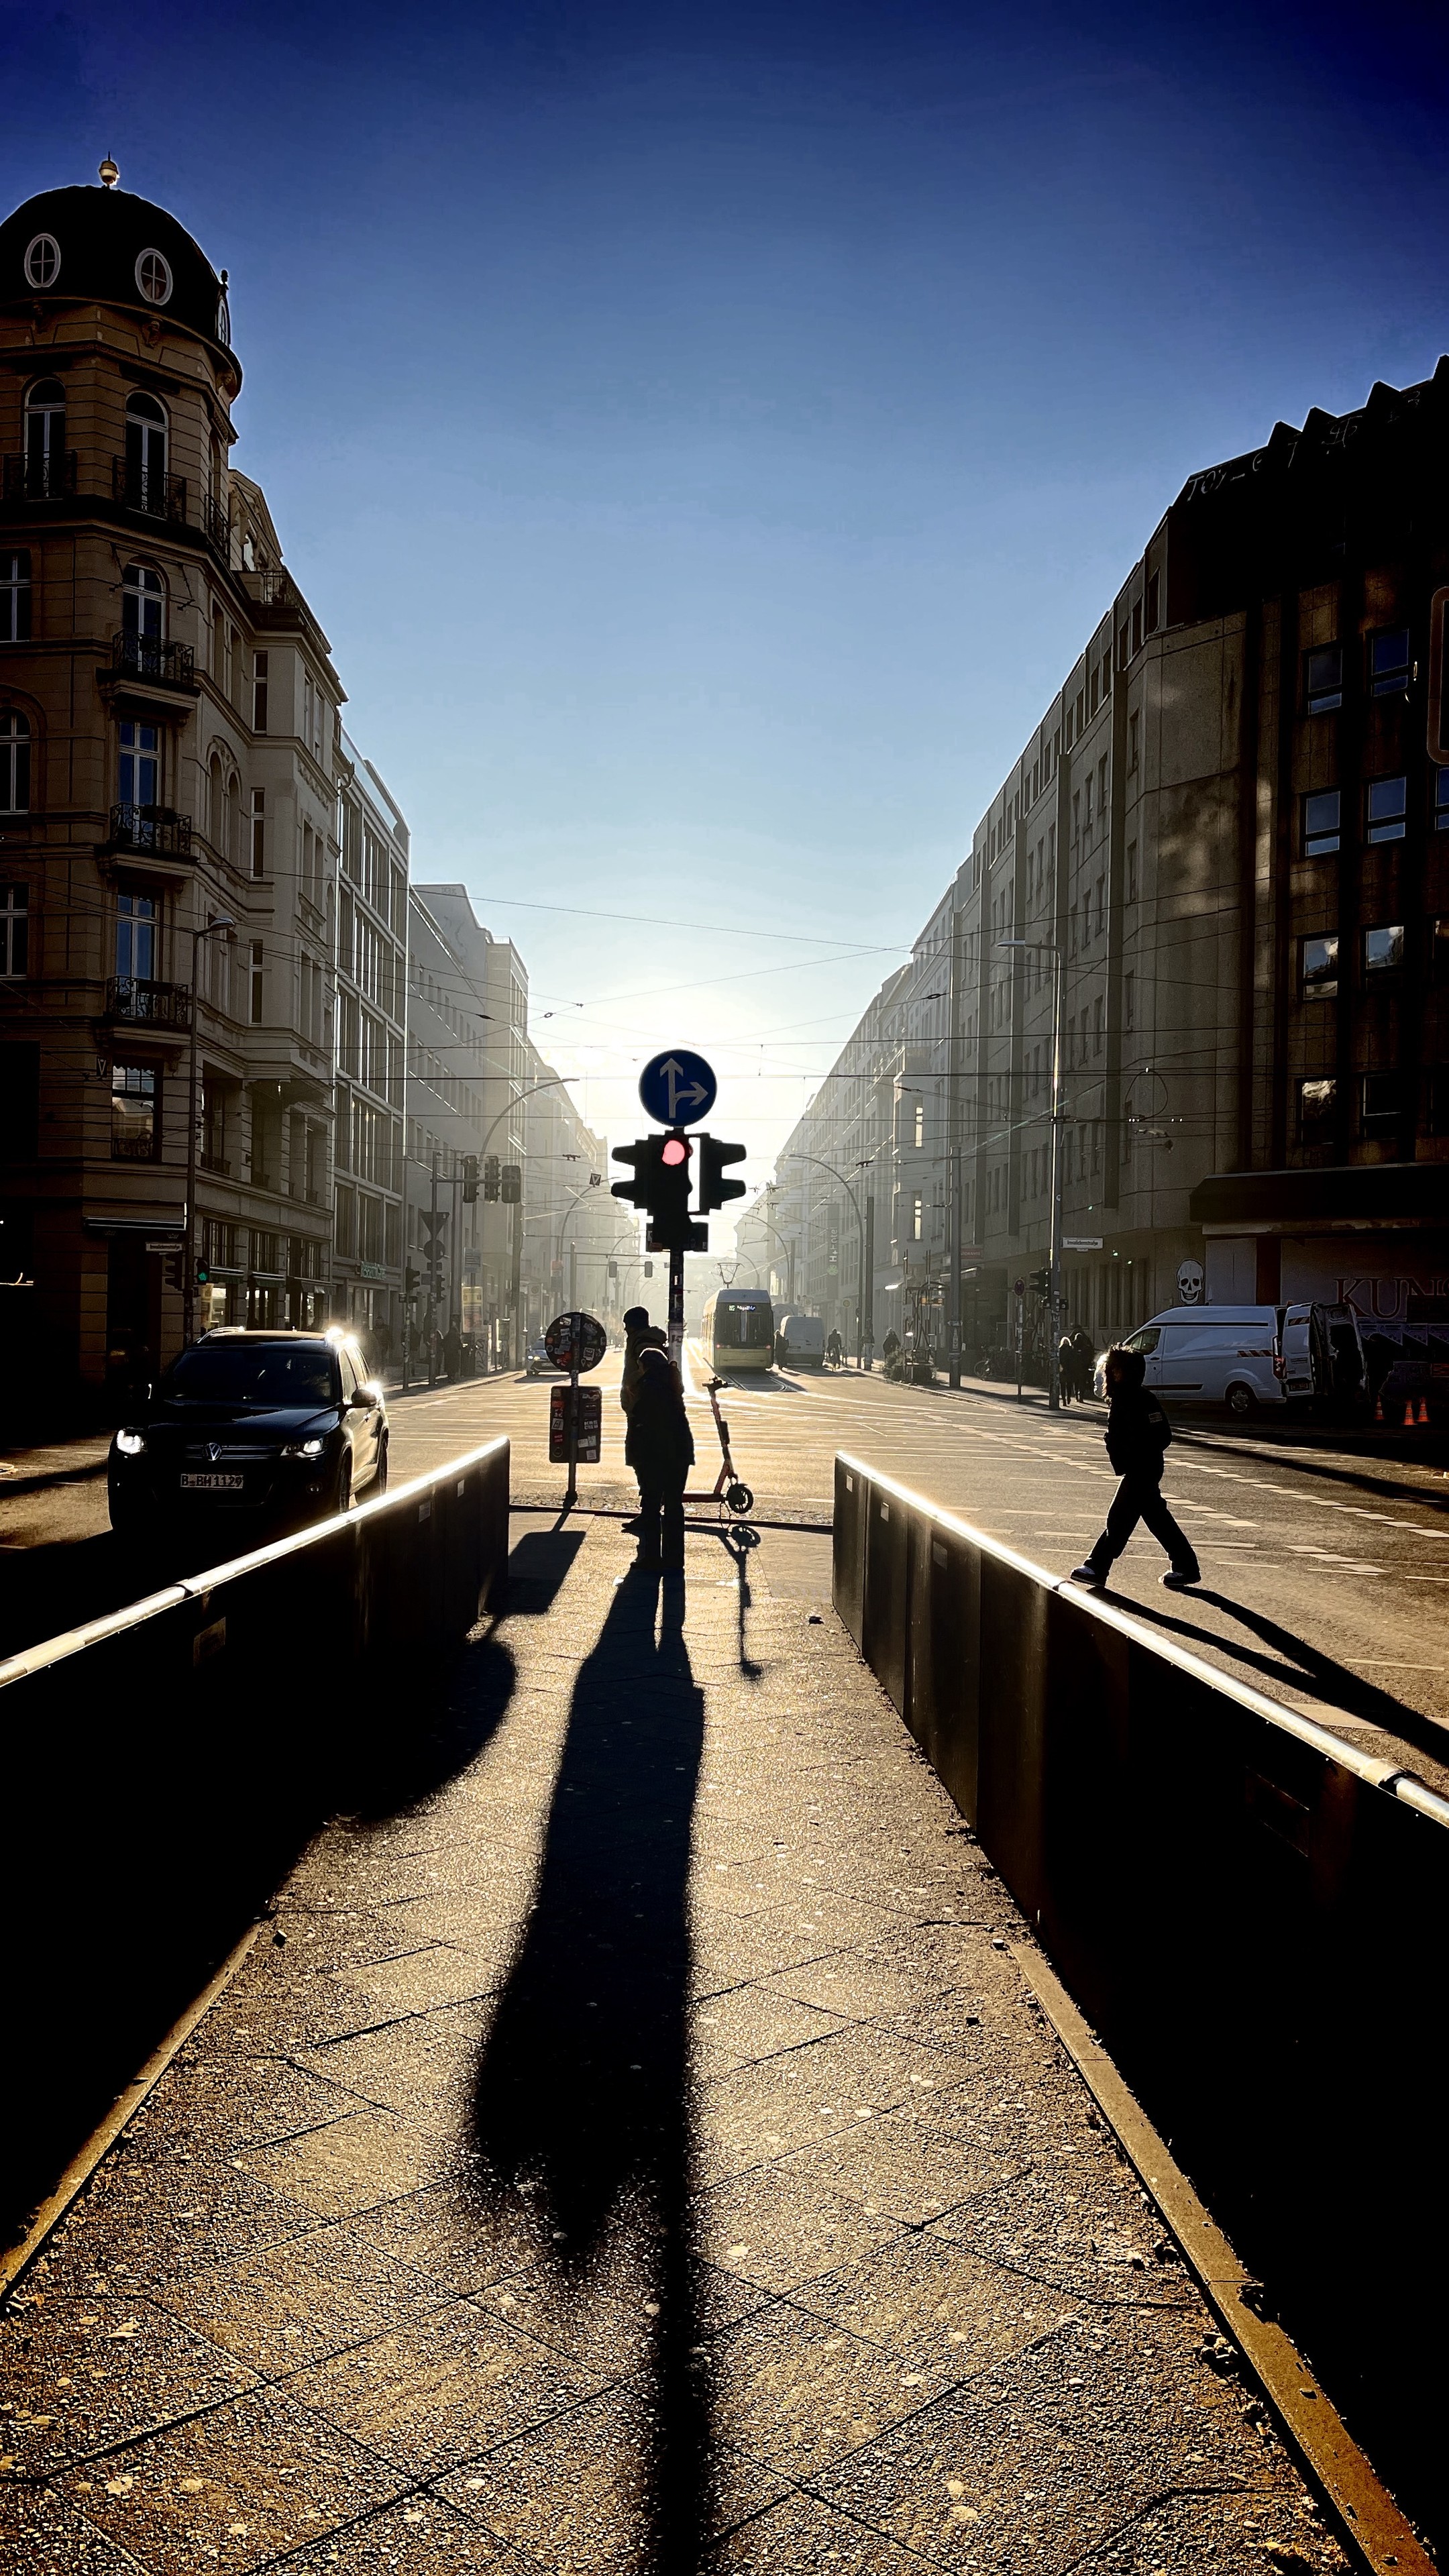 Urban street scene with backlight creating silhouettes of people and long shadows, traffic signal, tram, and architecture, under a clear sky.